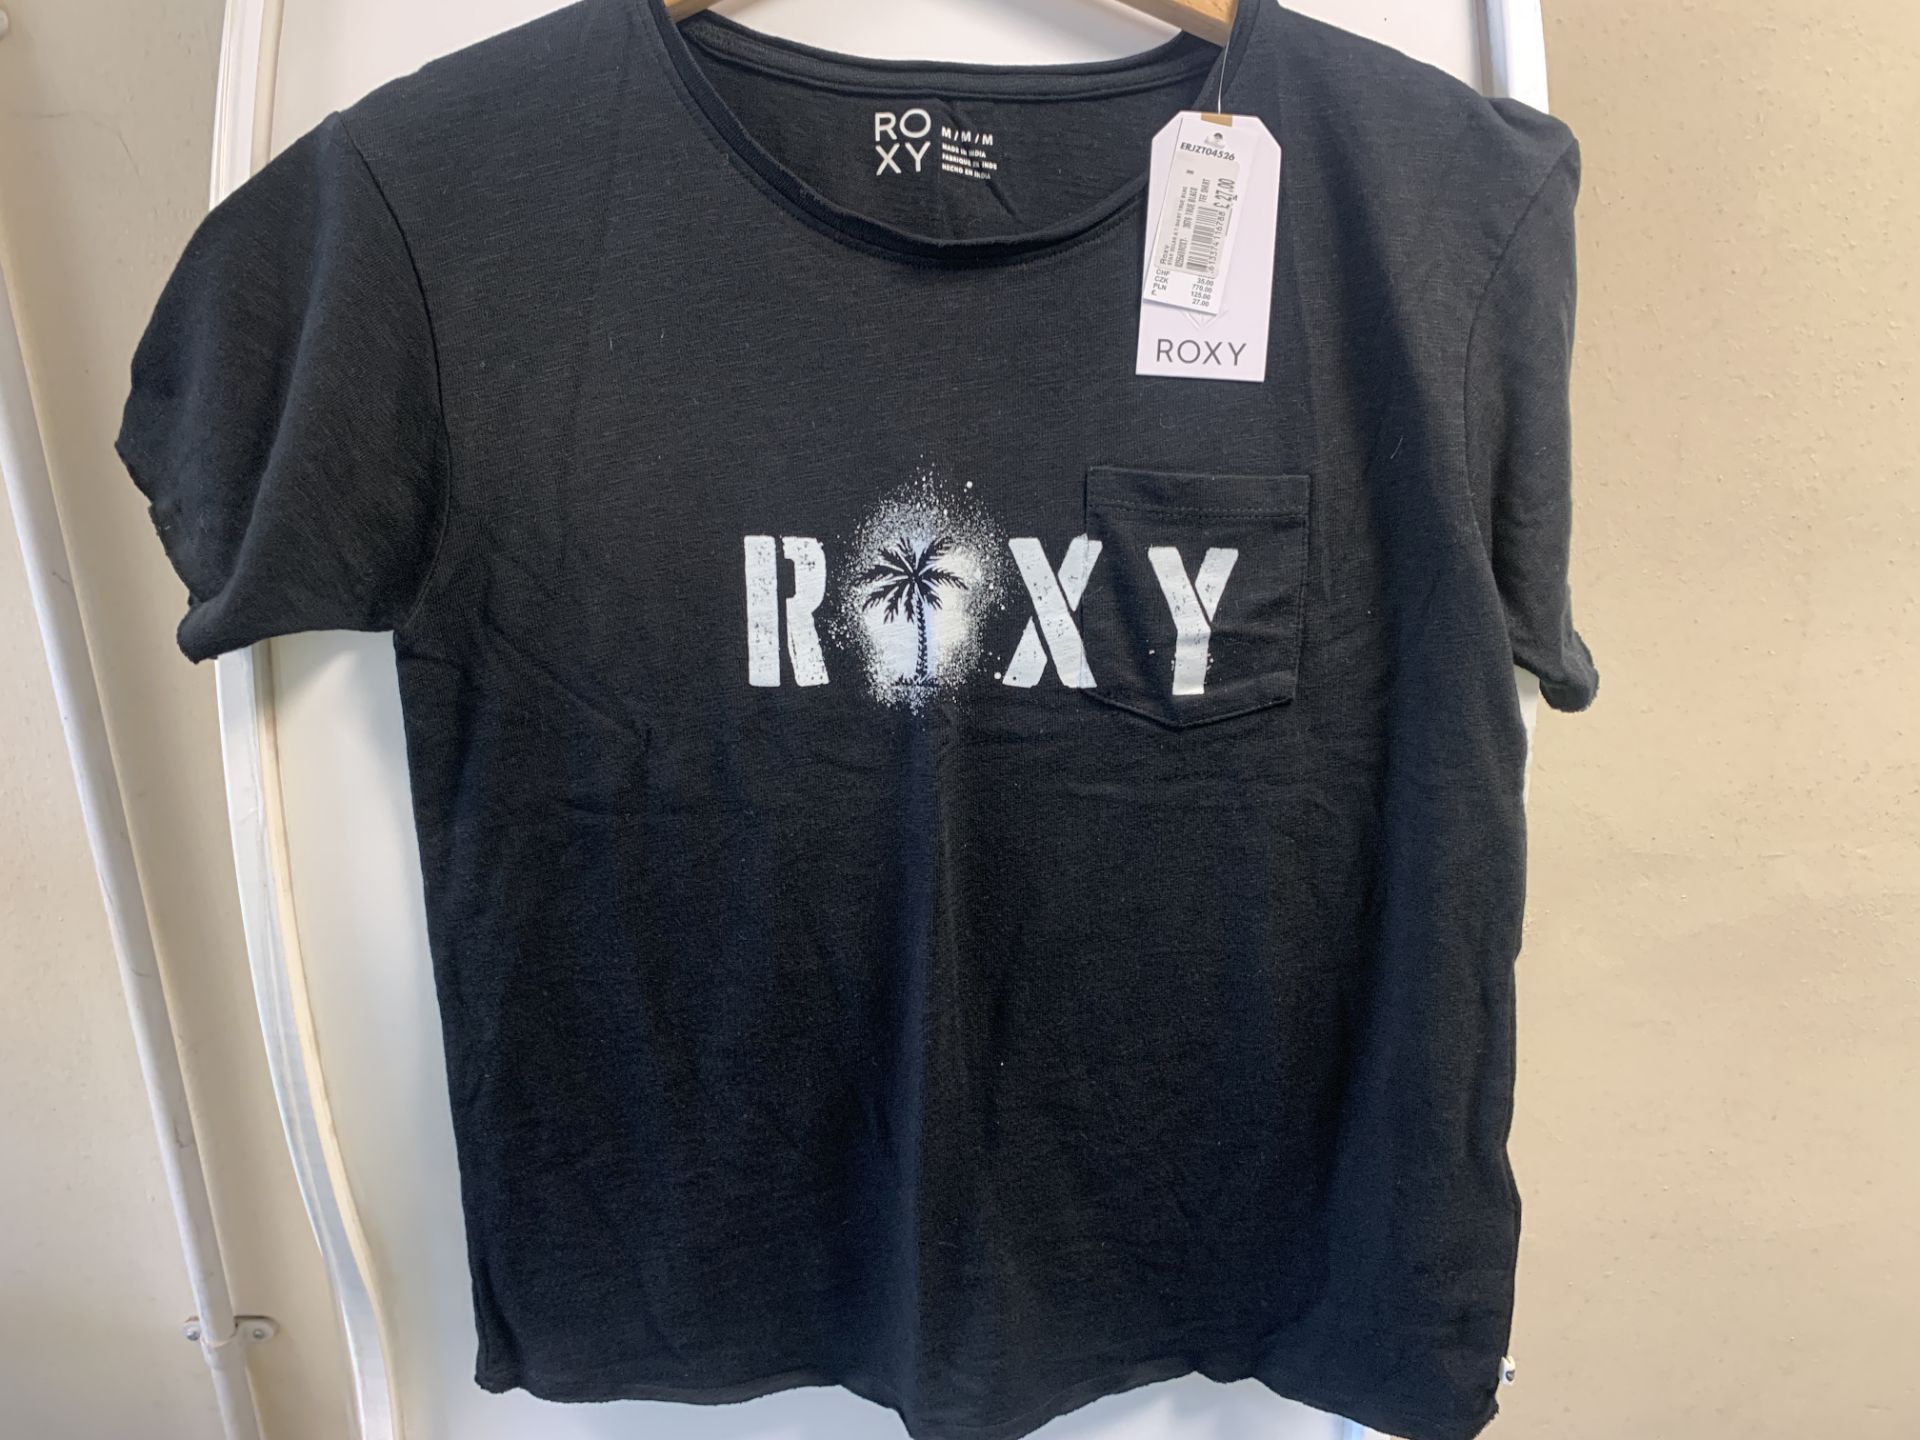 10 X BRAND NEW ROXY BLACK STAR SOLAR T SHIRTS IN VARIOUS SIZES RRP £270